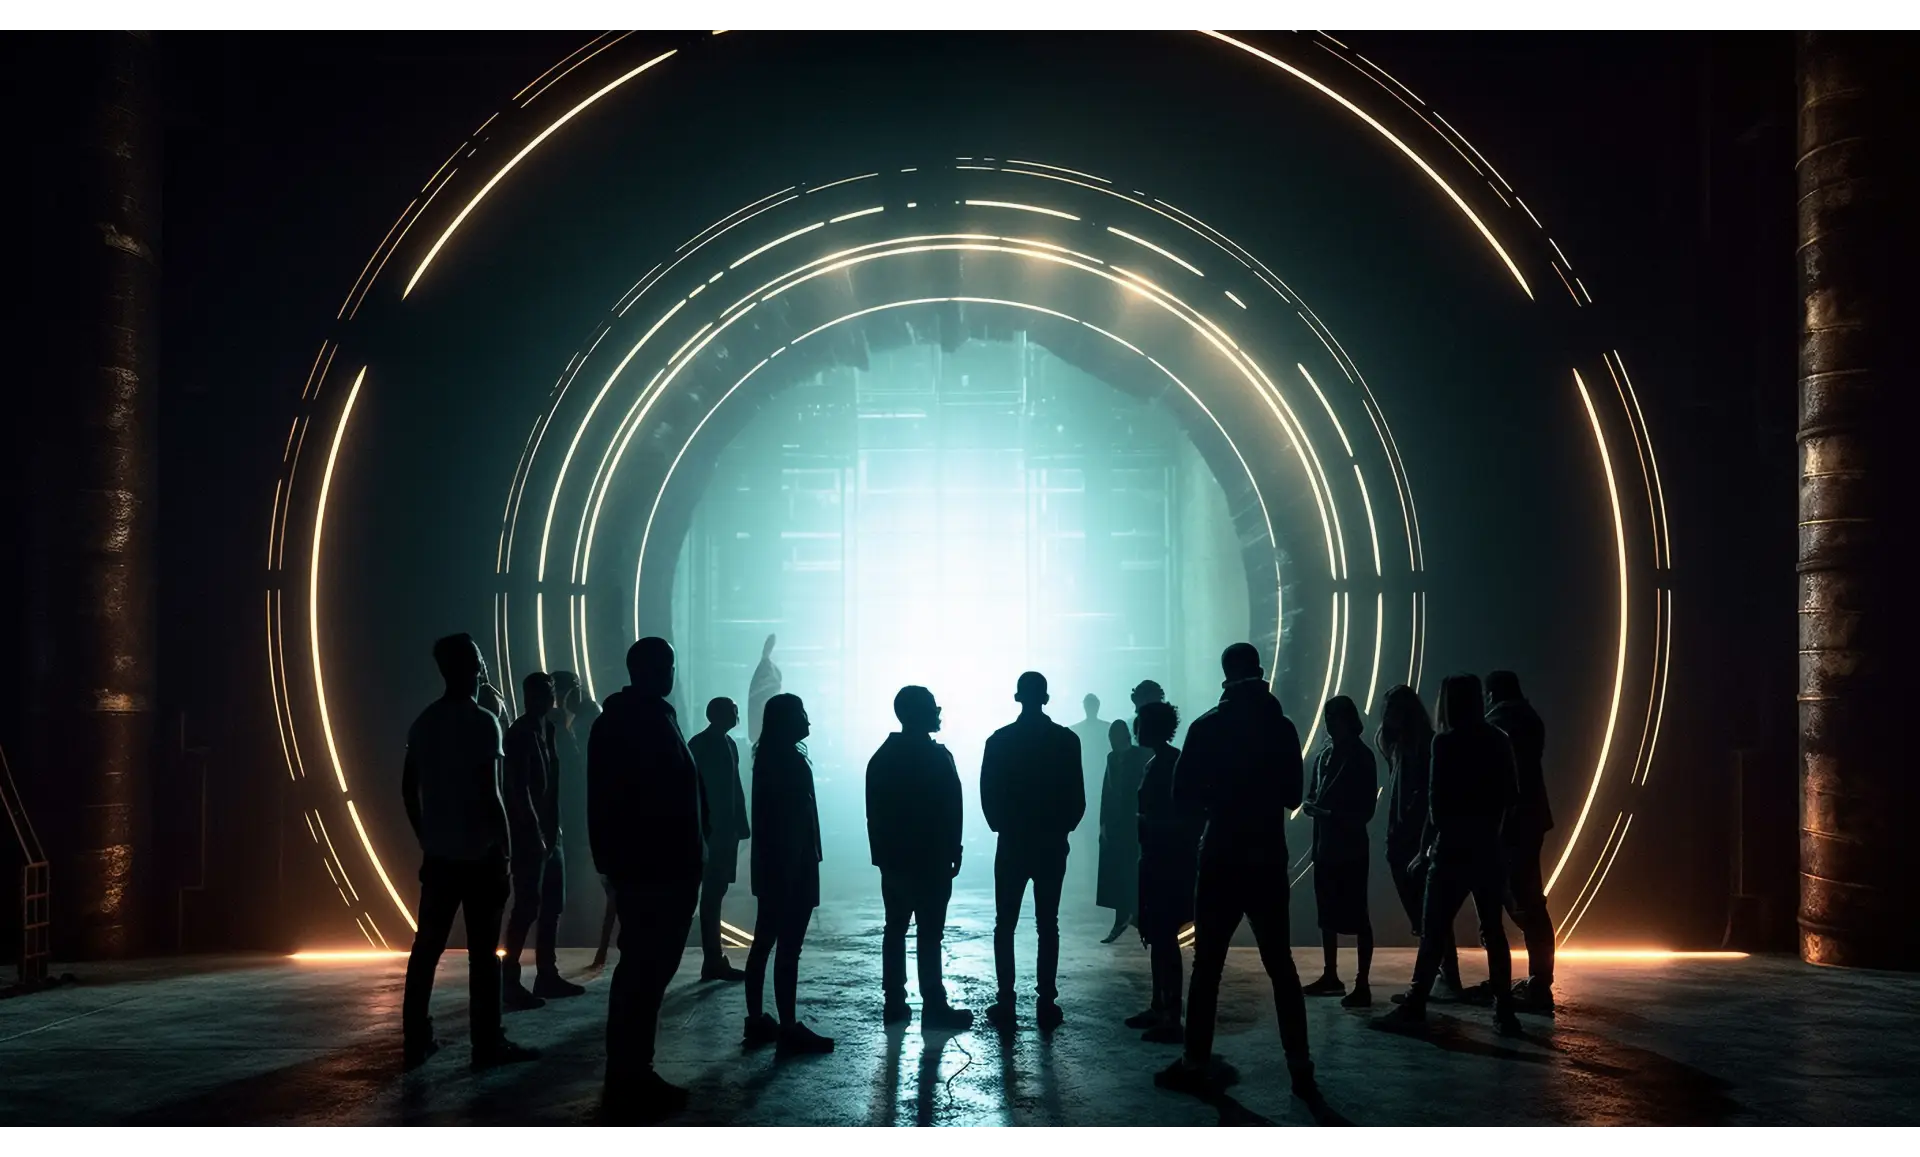 Group of people looking into giant spherical lighting 